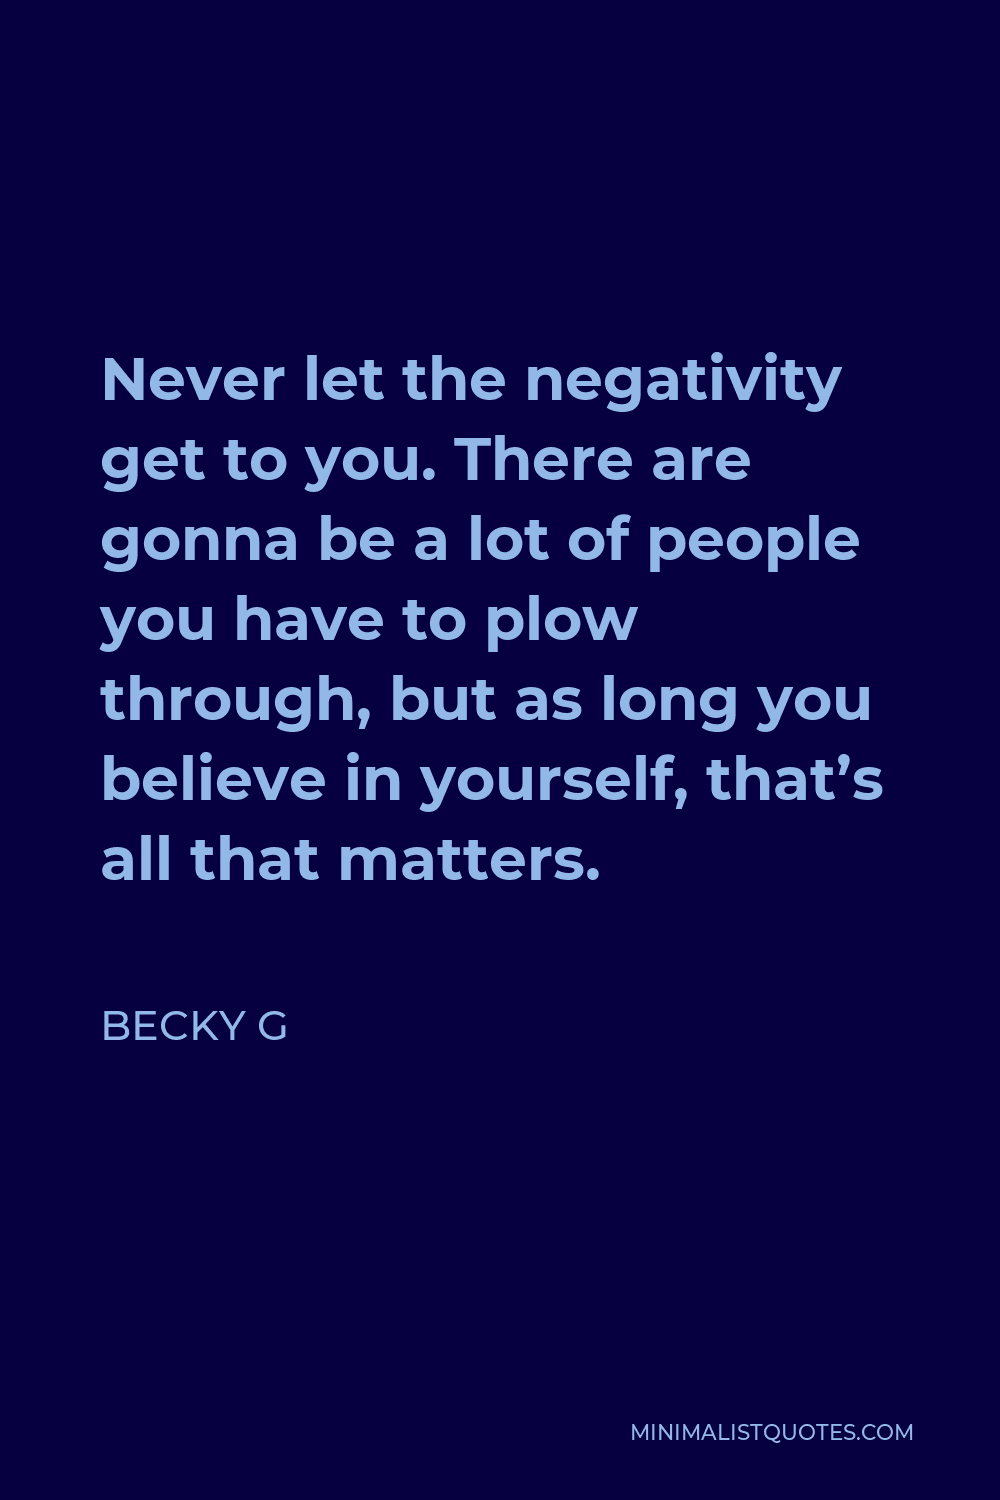 Becky G Quote - Never let the negativity get to you. There are gonna be a lot of people you have to plow through, but as long you believe in yourself, that’s all that matters.